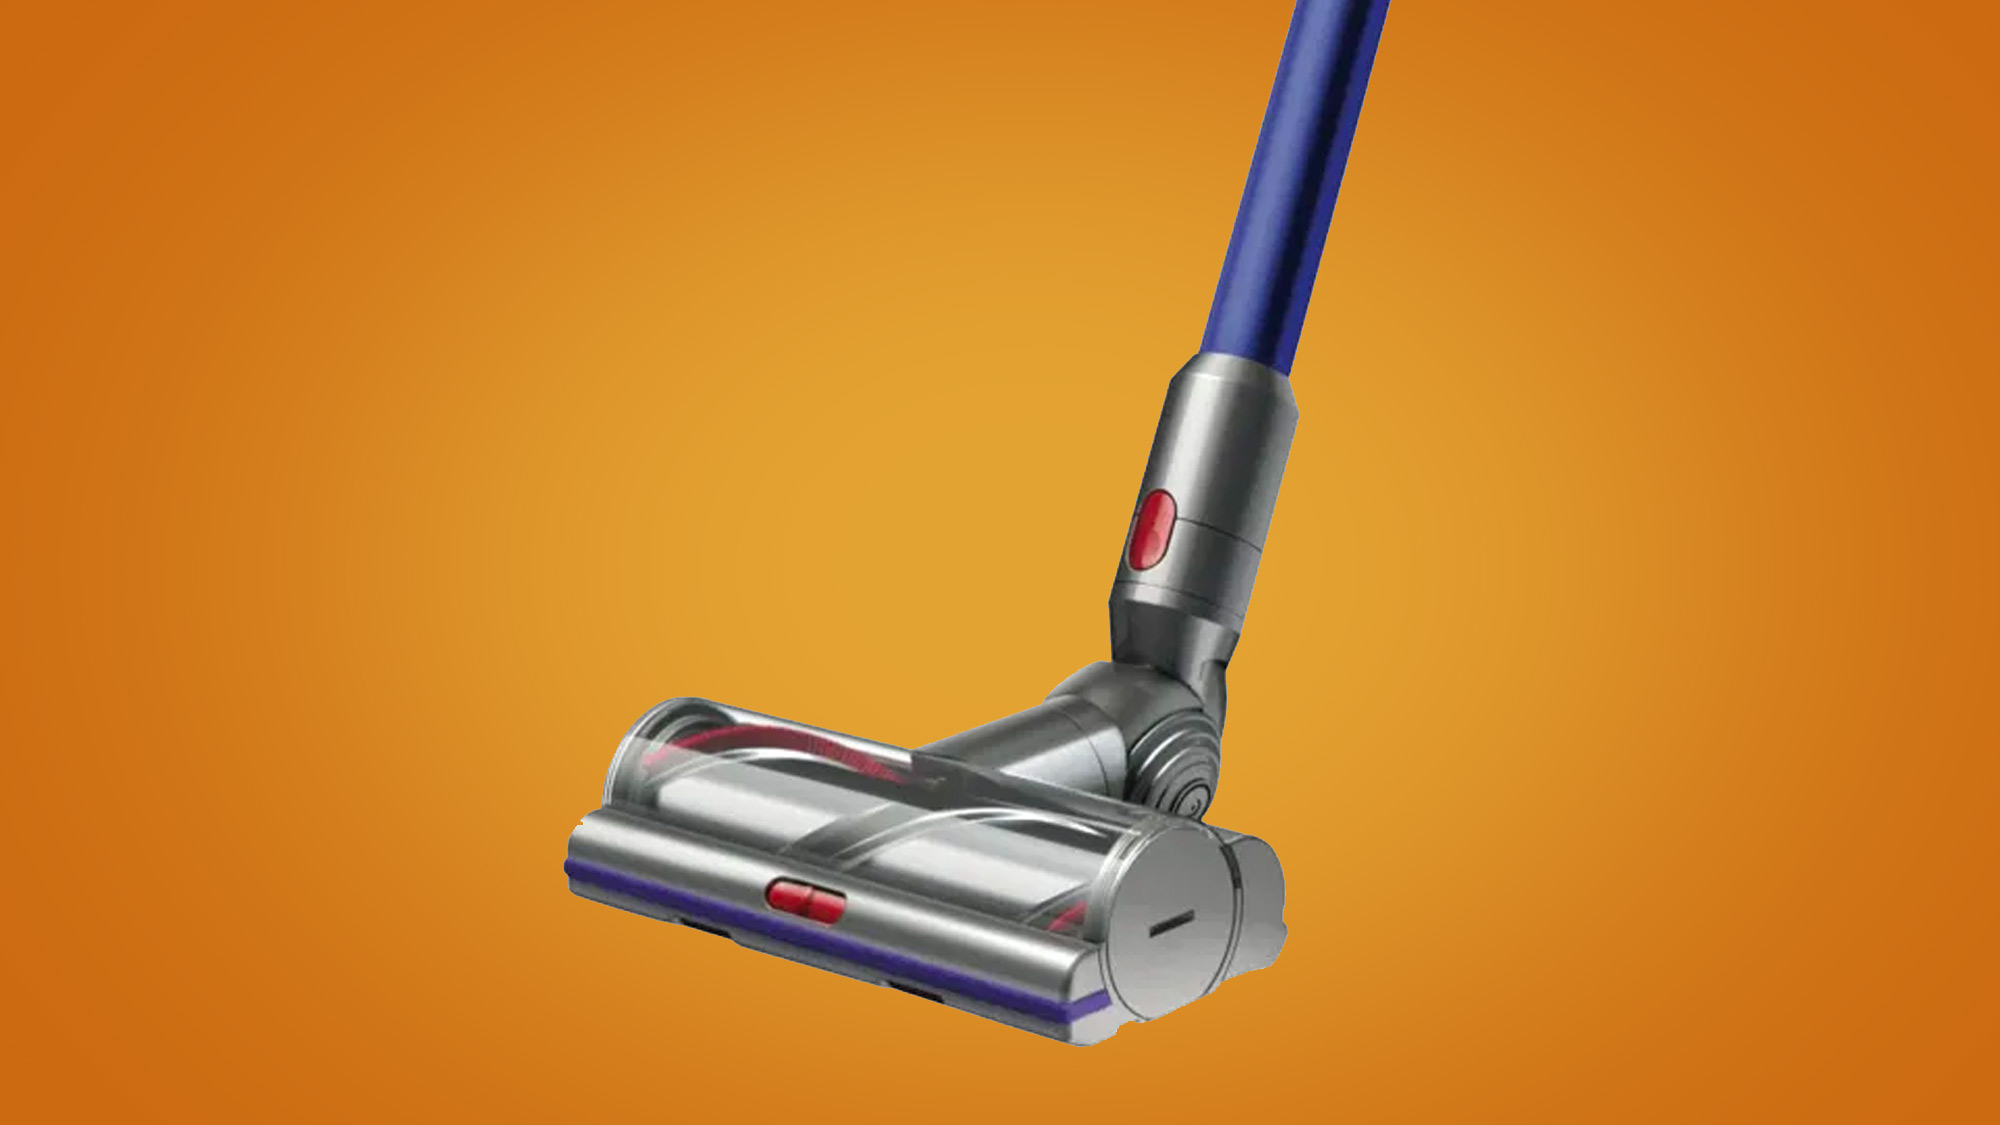 The Best Vacuum Cleaners 2020 10 Best Vacuums From Dyson To Shark Techradar